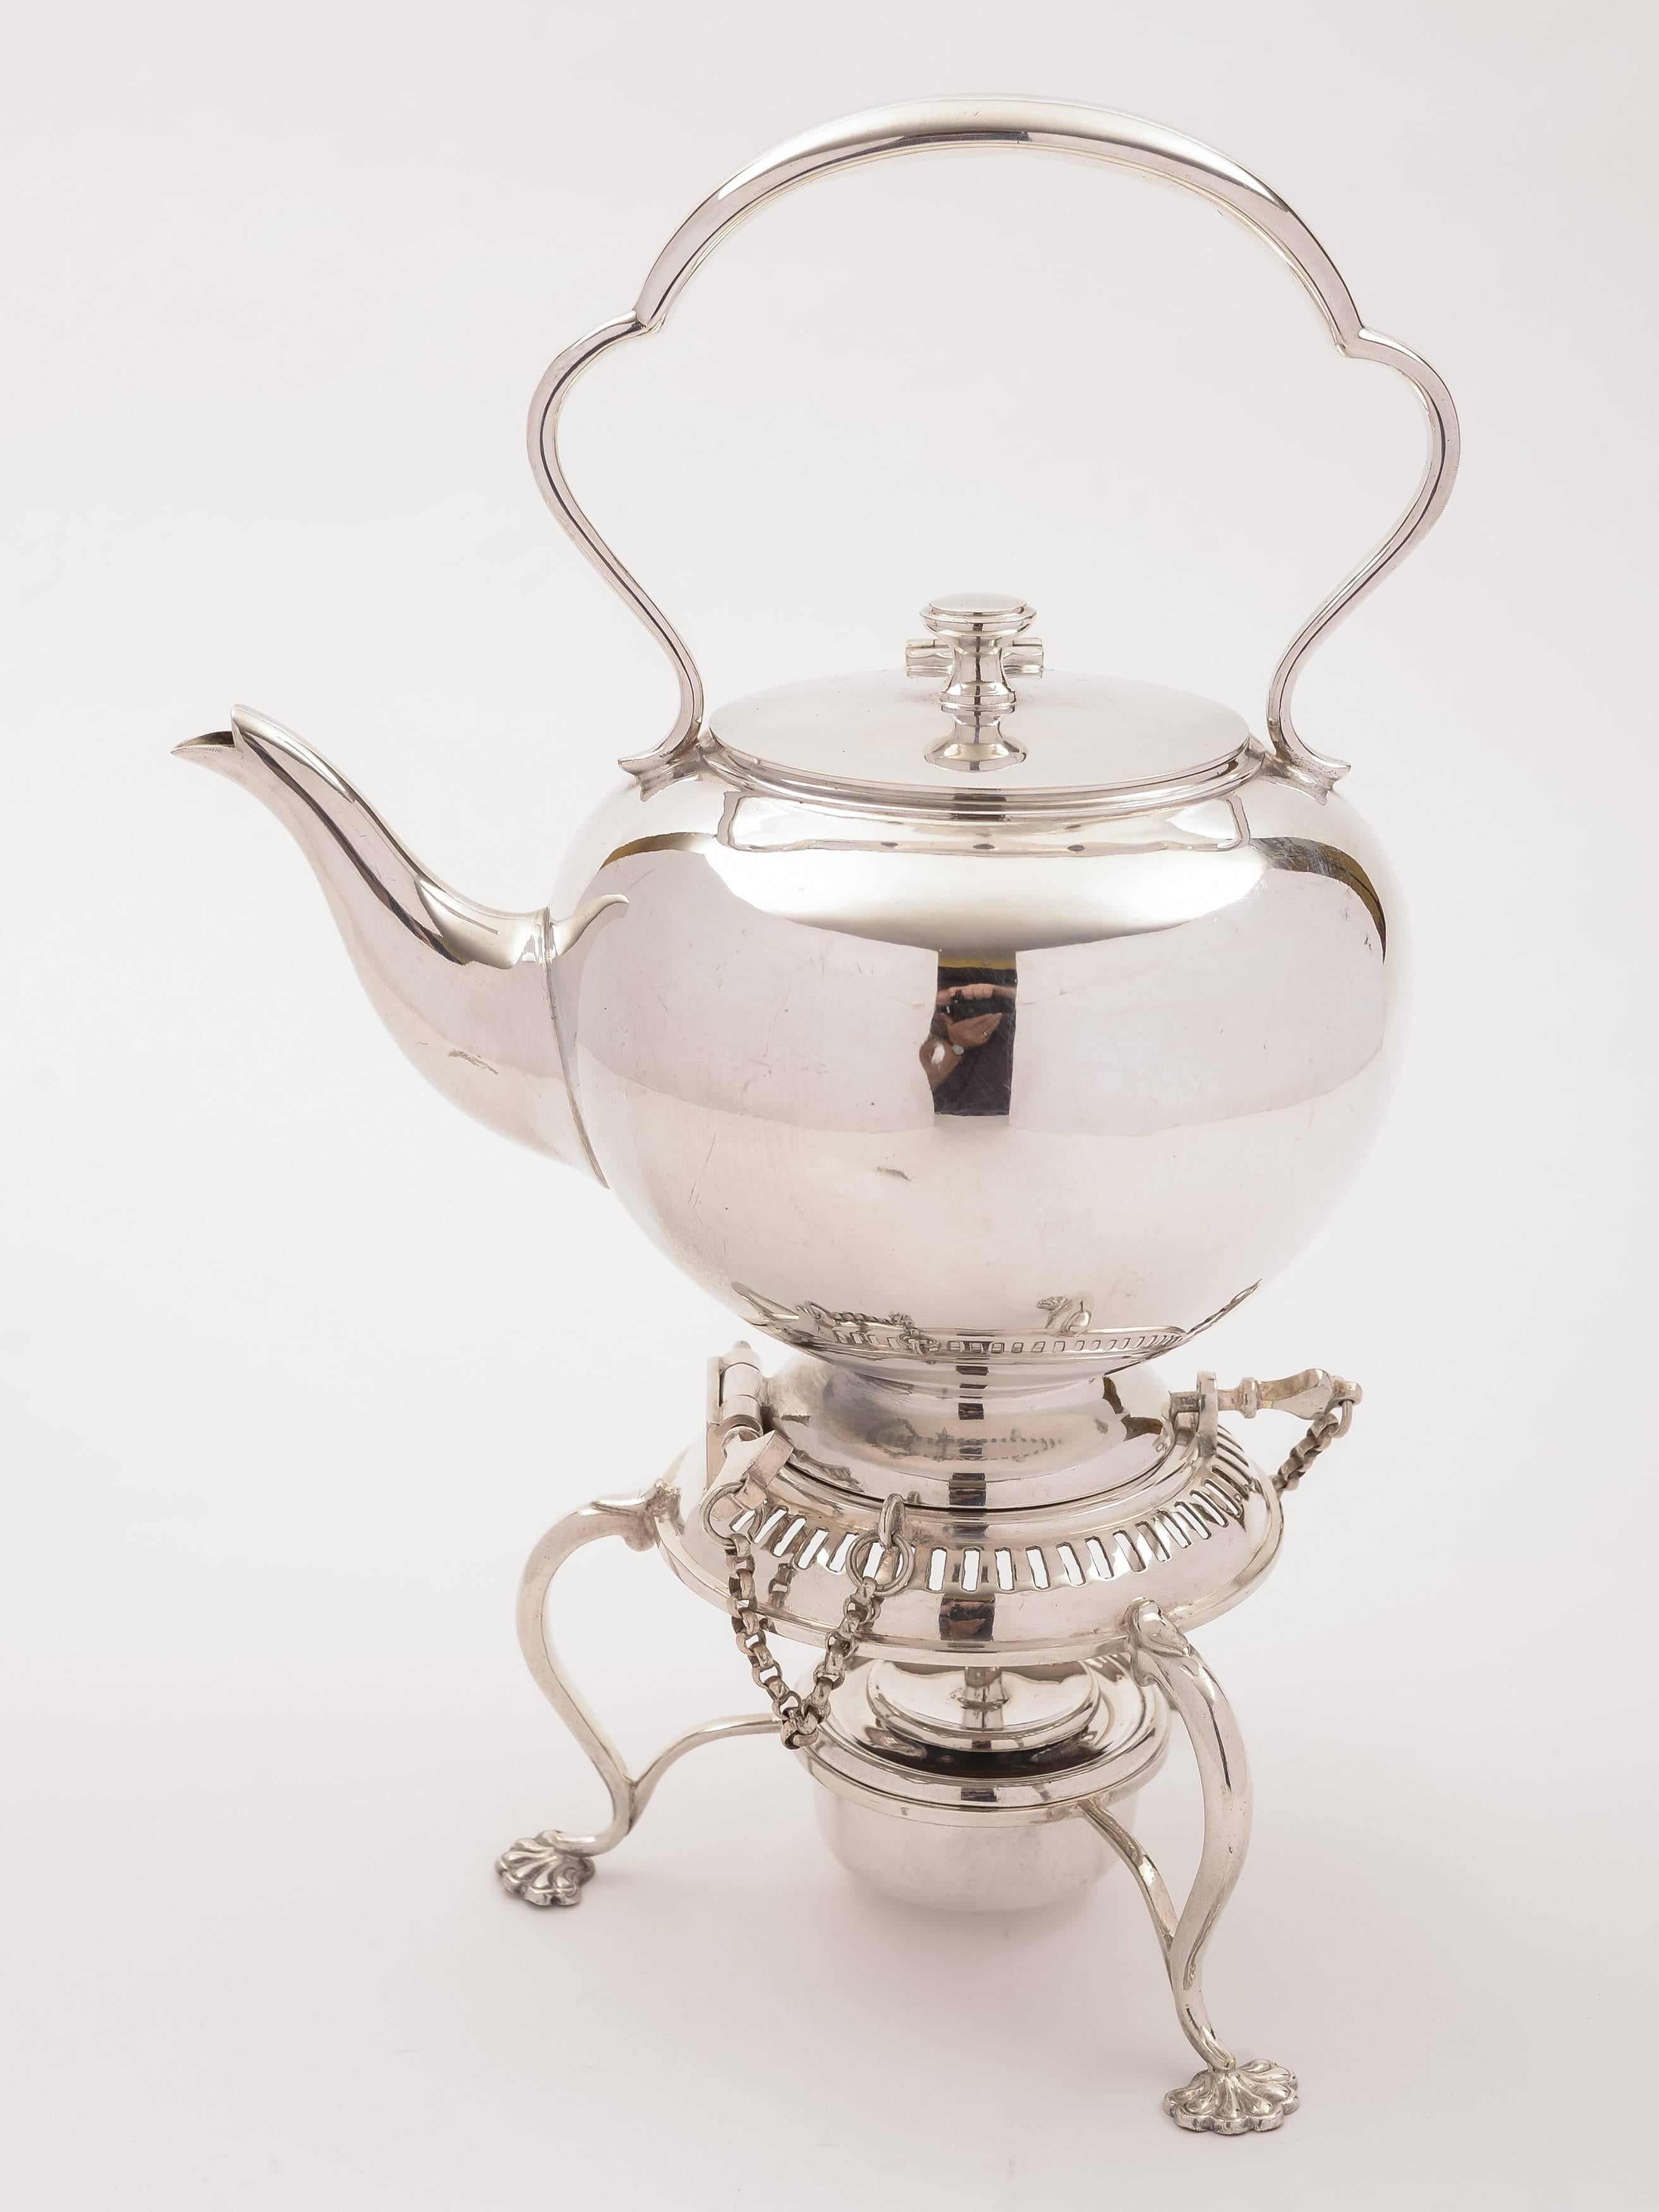 A lovely English Edwardian silver plated bachelors tea kettle. Sits on base which has three pad feet and central burner. Keys are located on base to hold the kettle in place and allow it to tip for pouring. The kettle itself is spherical and has a